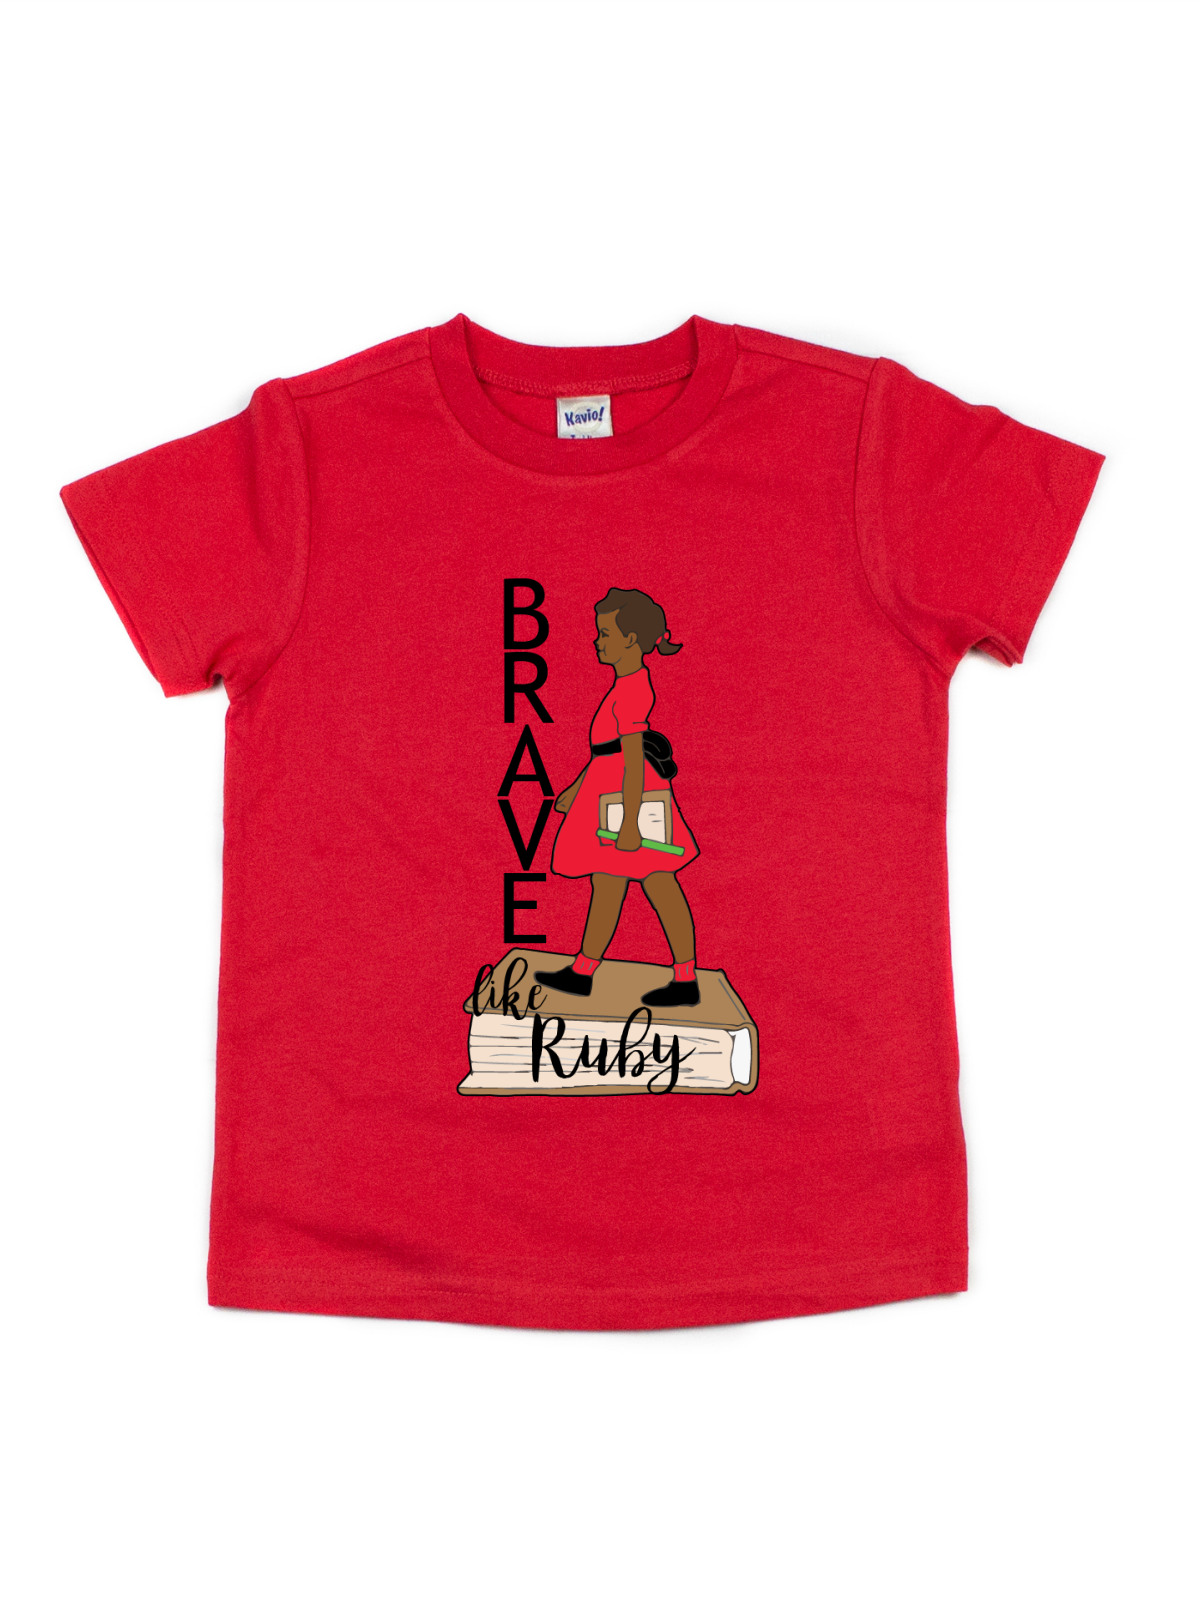 Brave like Ruby Kids & Adult Shirt - Red